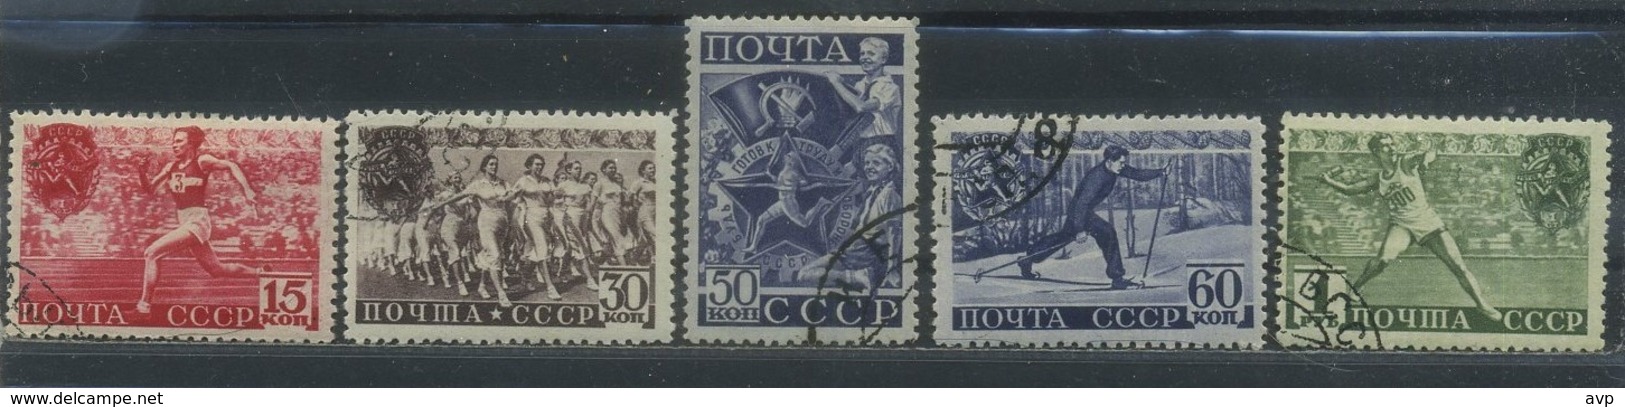 USSR 1940 Michel 753A-757A Perf. 12 1/2 All-Union Physical Culture Complex. Used - Oblitérés